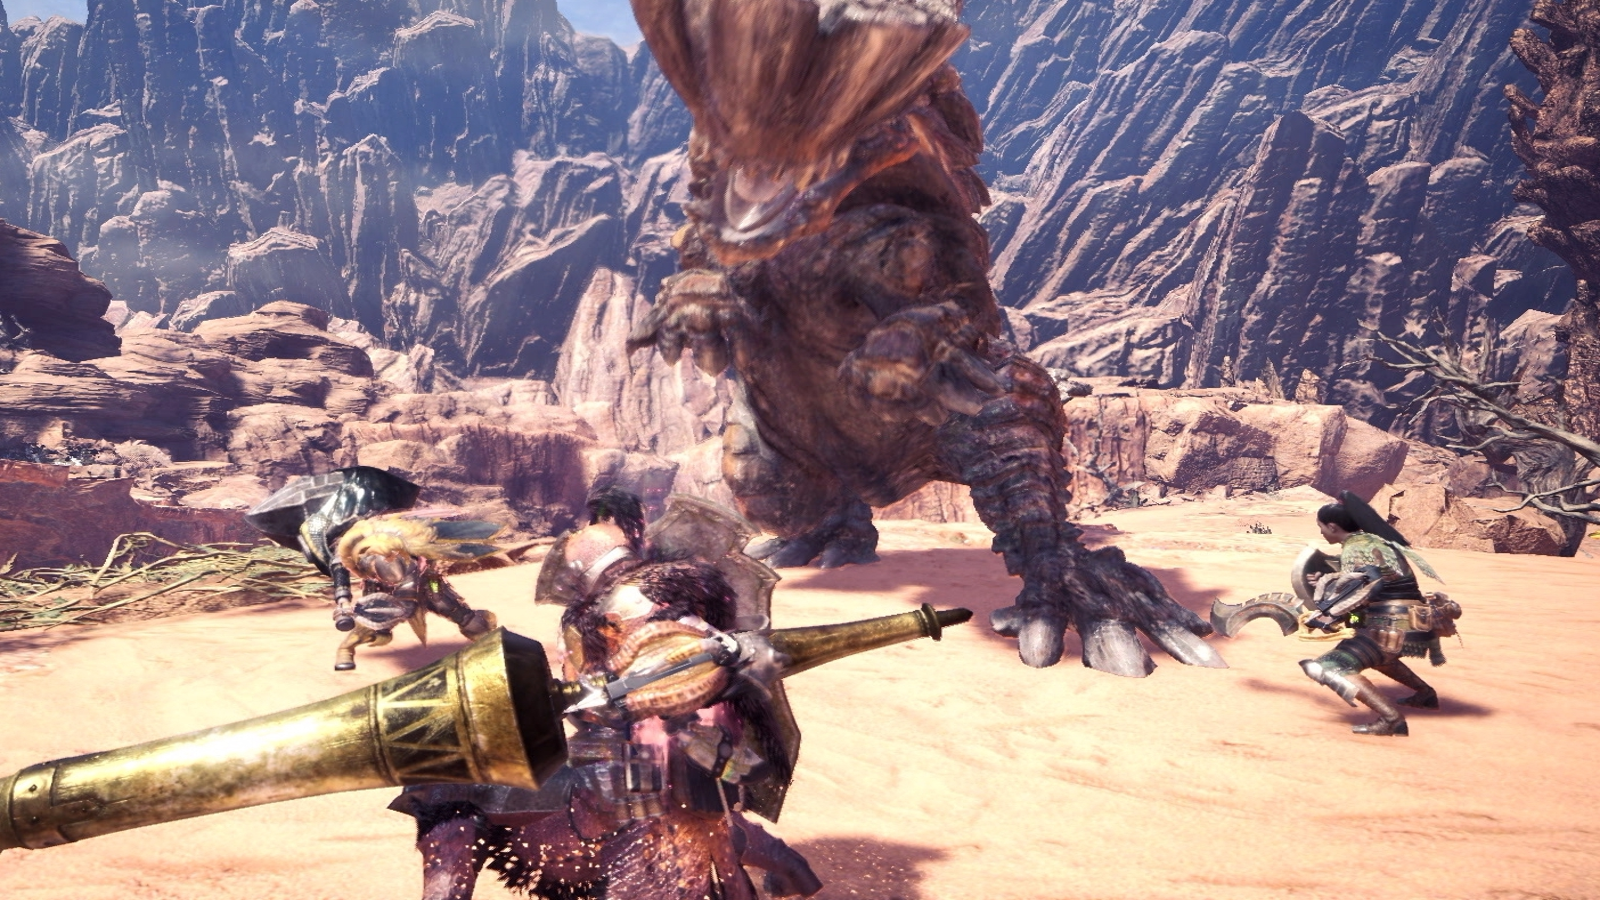 Monster Hunter: World is another game where hunting is pure play